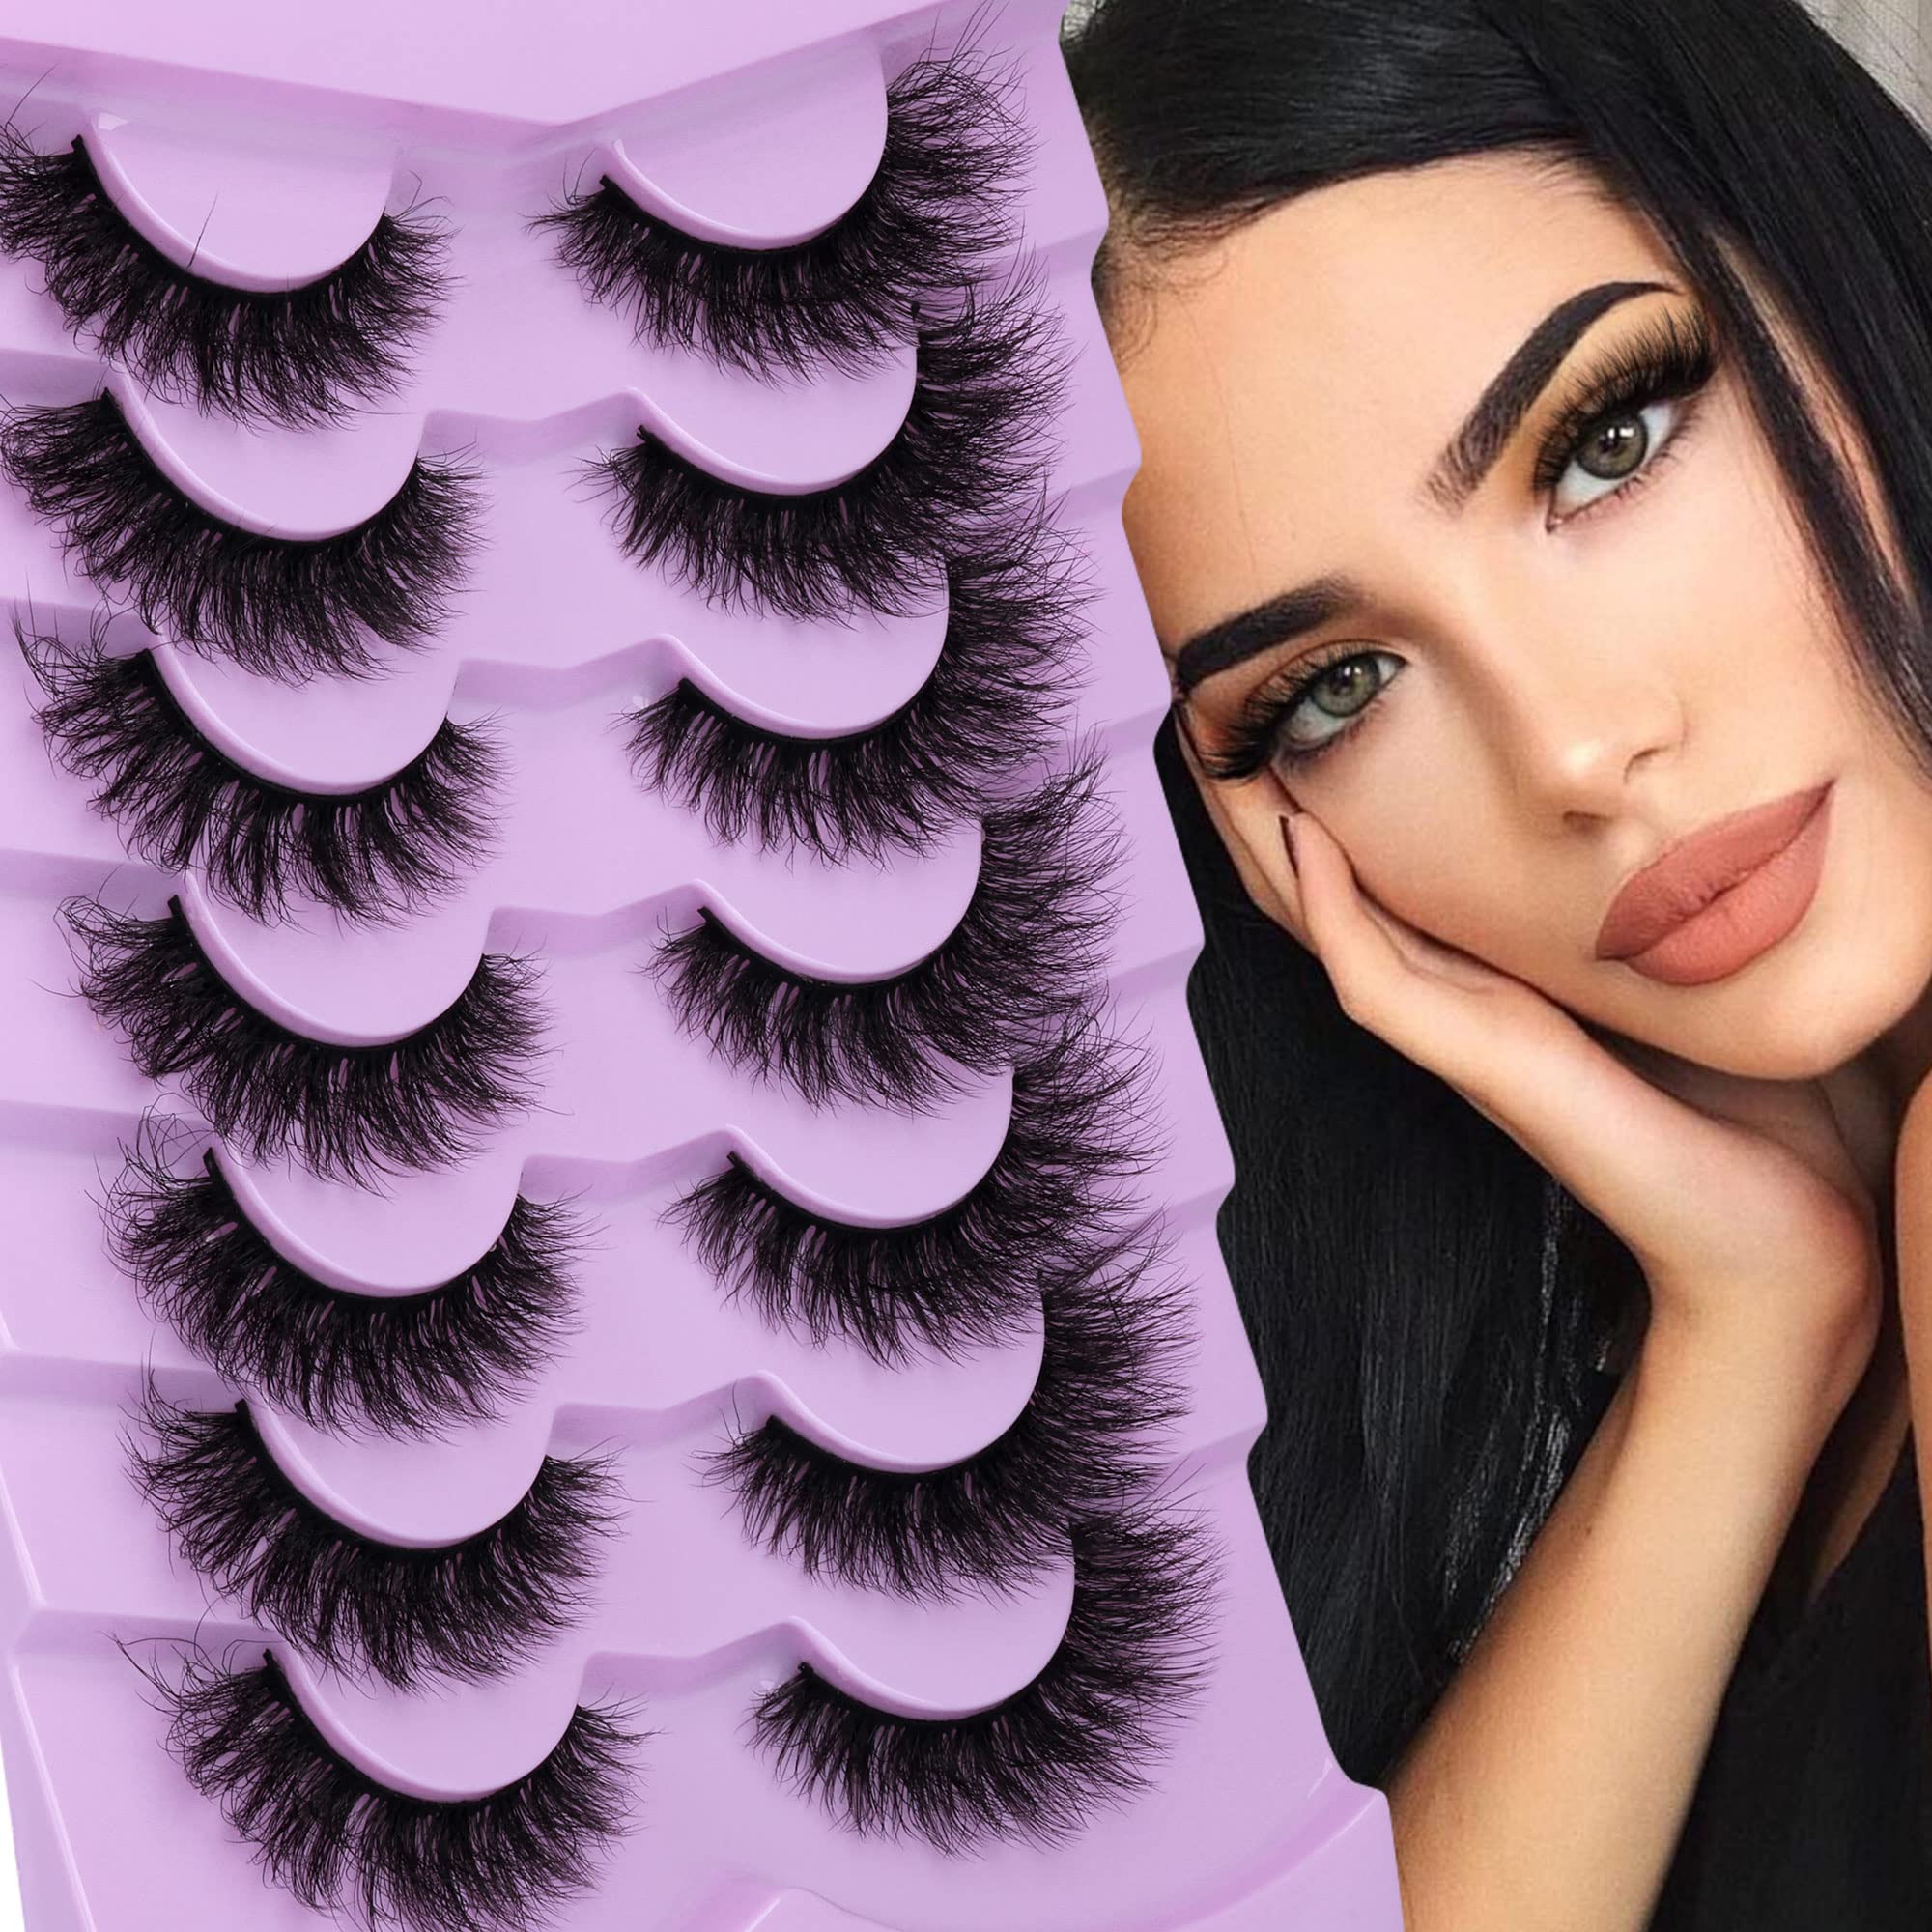 FANXITON Mink Lashes Fulffy Natural Short False Eyelashes Cat Eye Lashes Mink Eye Lashes 5D Curly Wispy 7 Pairs Faux Mink Lashes Multipack